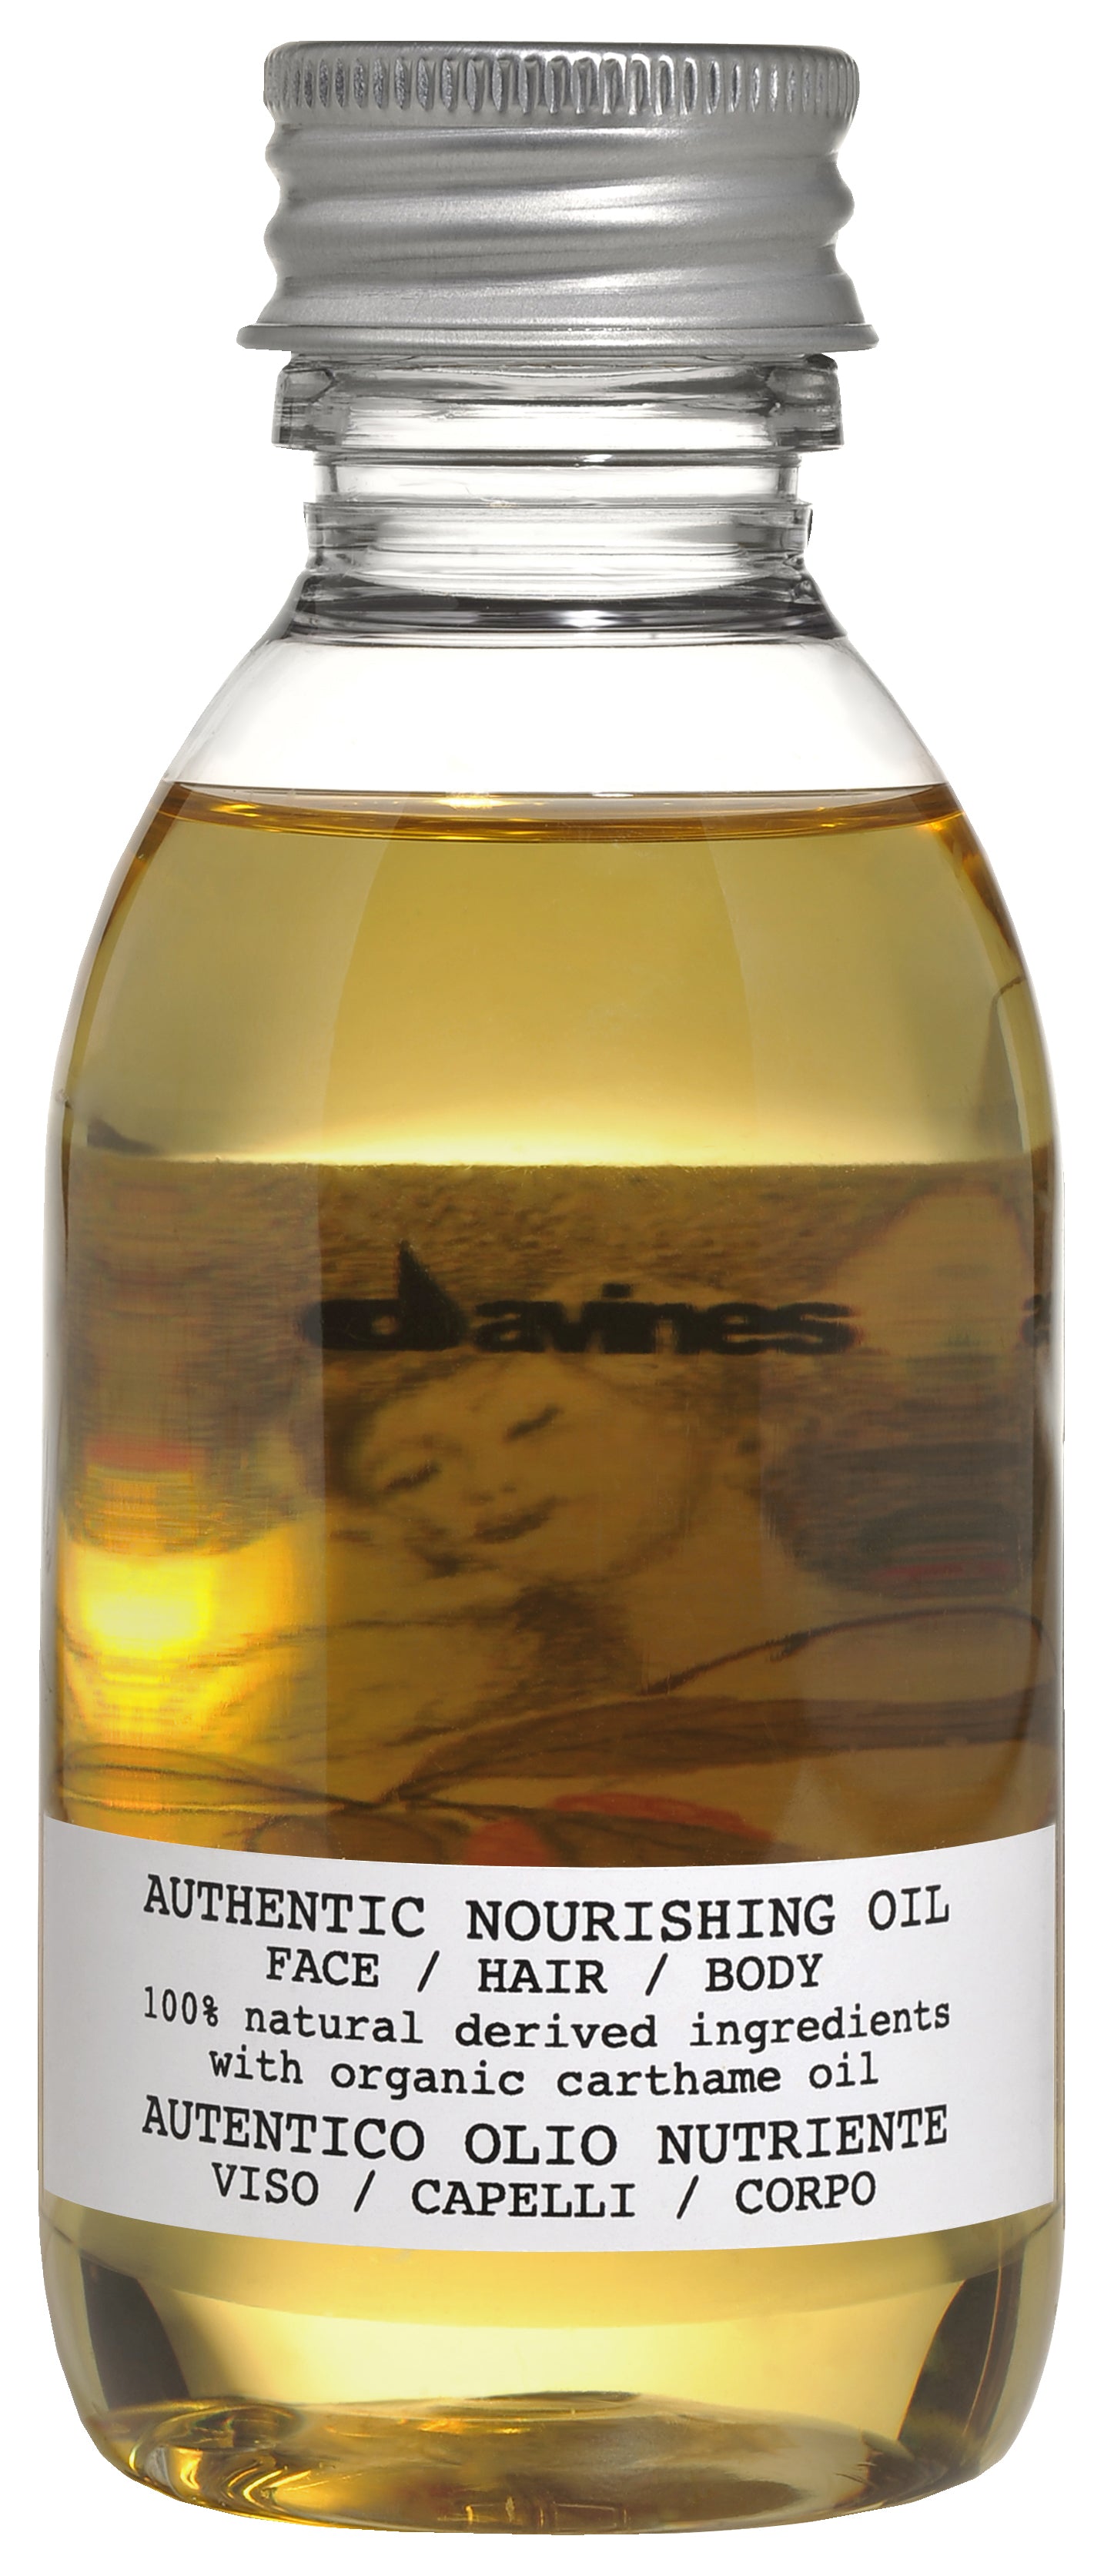 Authentic Nourishing Oil by davines